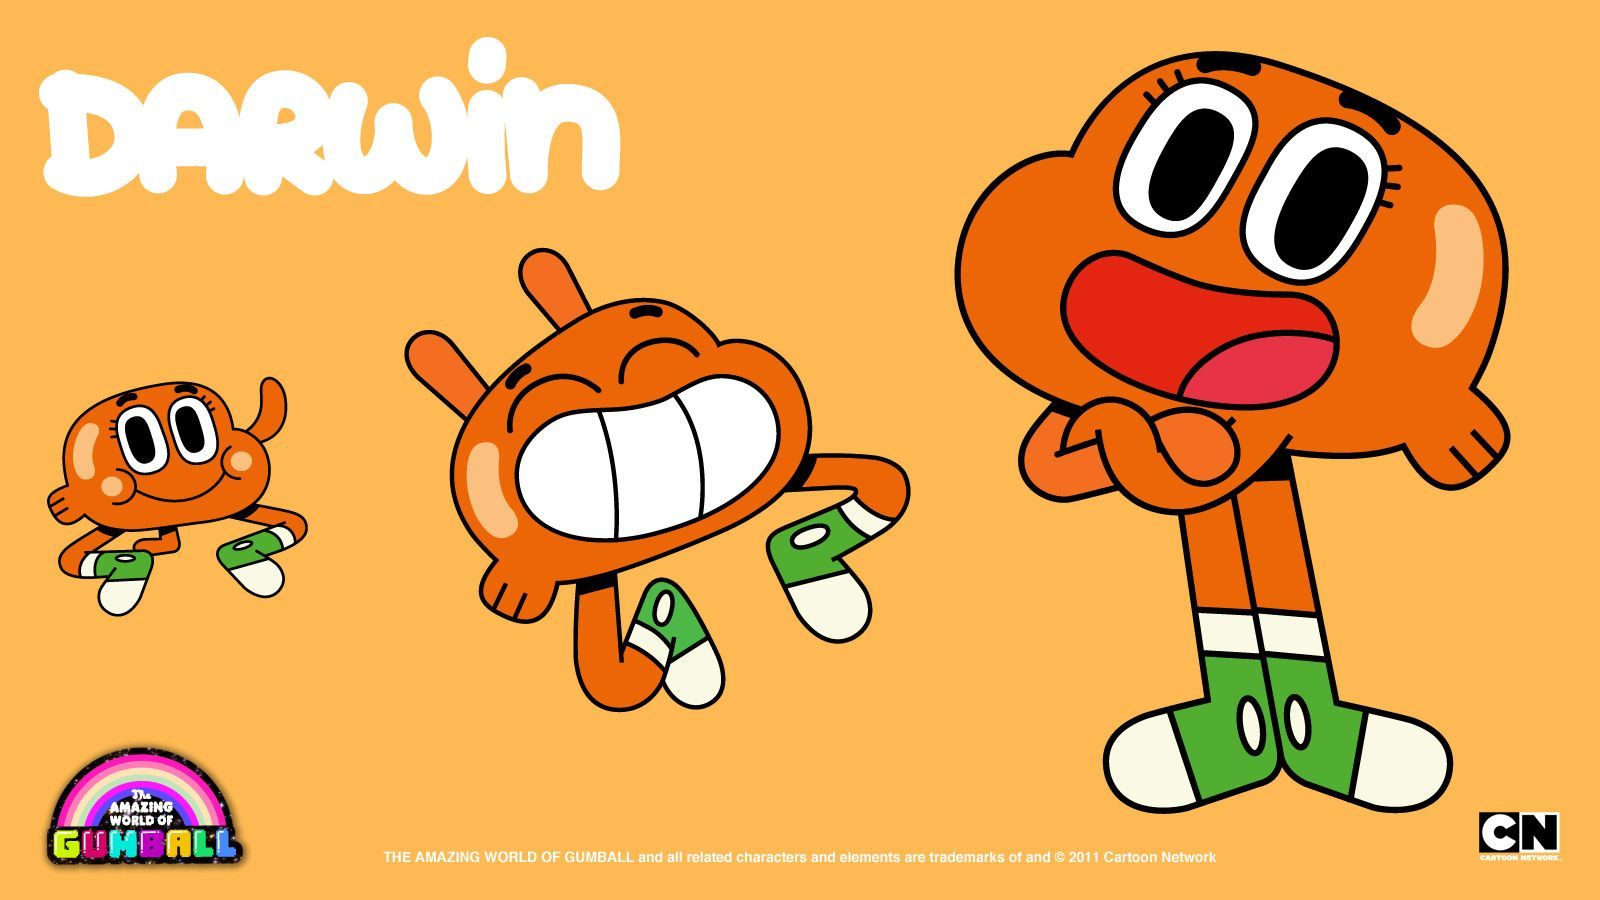 What Character From The Amazing World of Gumball Are You